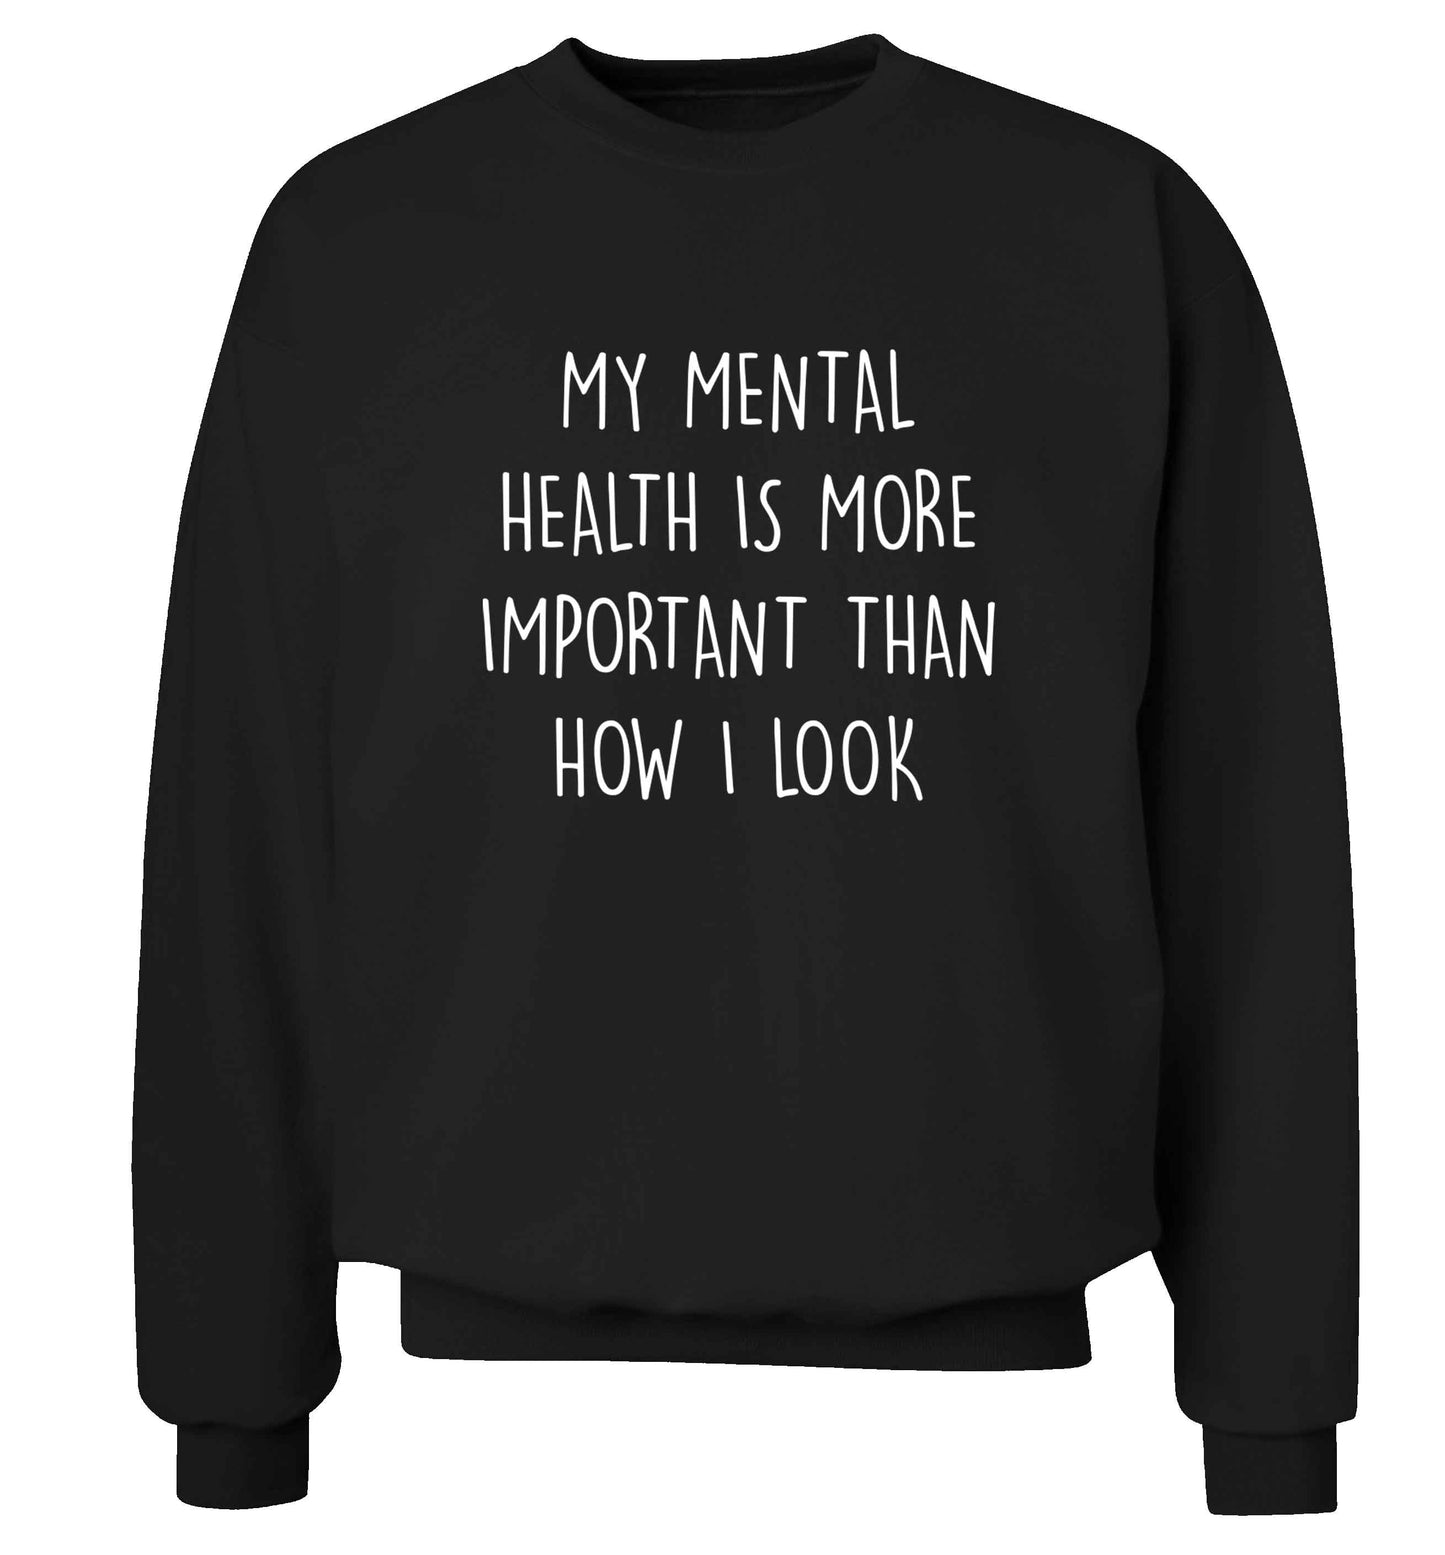 My mental health is more importnat than how I look adult's unisex black sweater 2XL